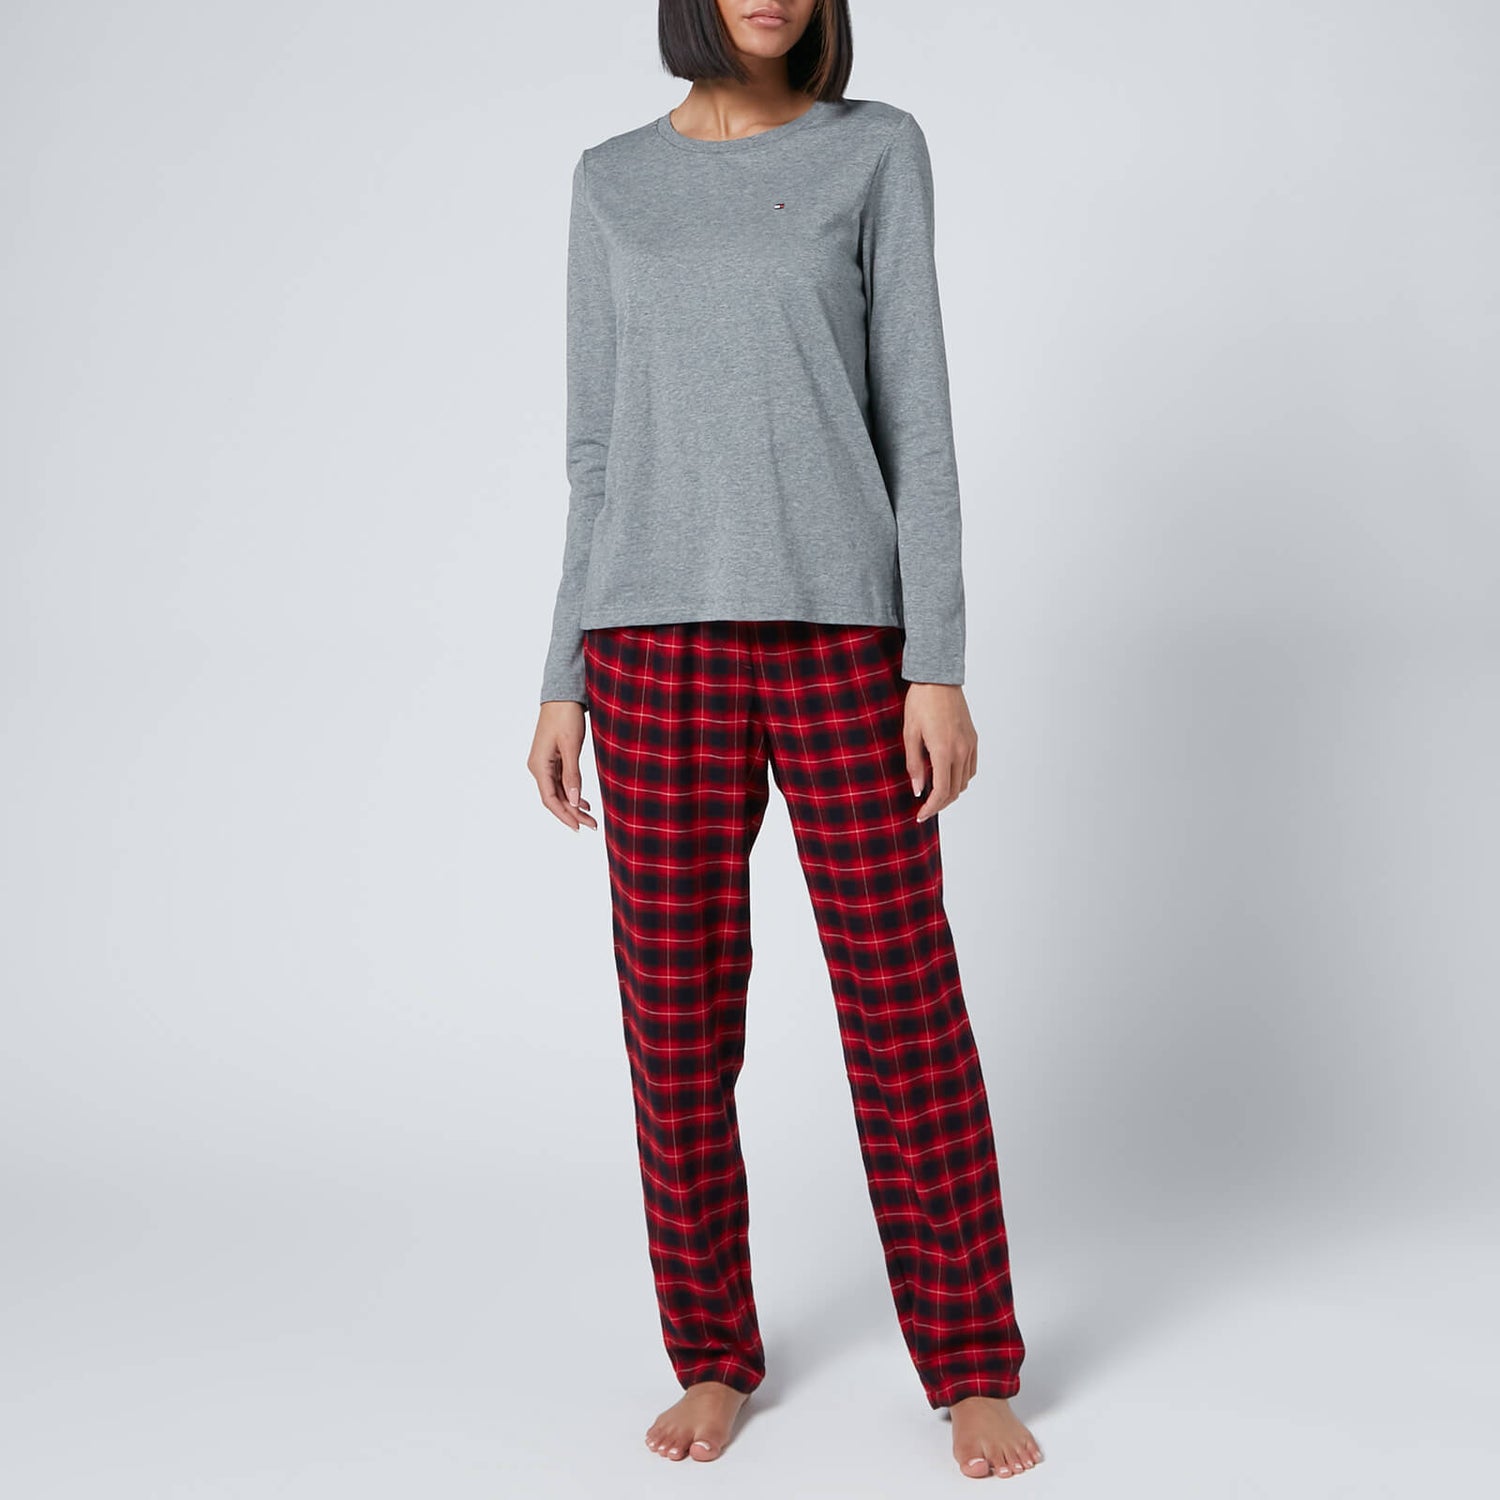 Tommy Hilfiger Women's Long Sleeve Flannel Pant Holiday Set - Grey HT/Ombre Plaid - XS